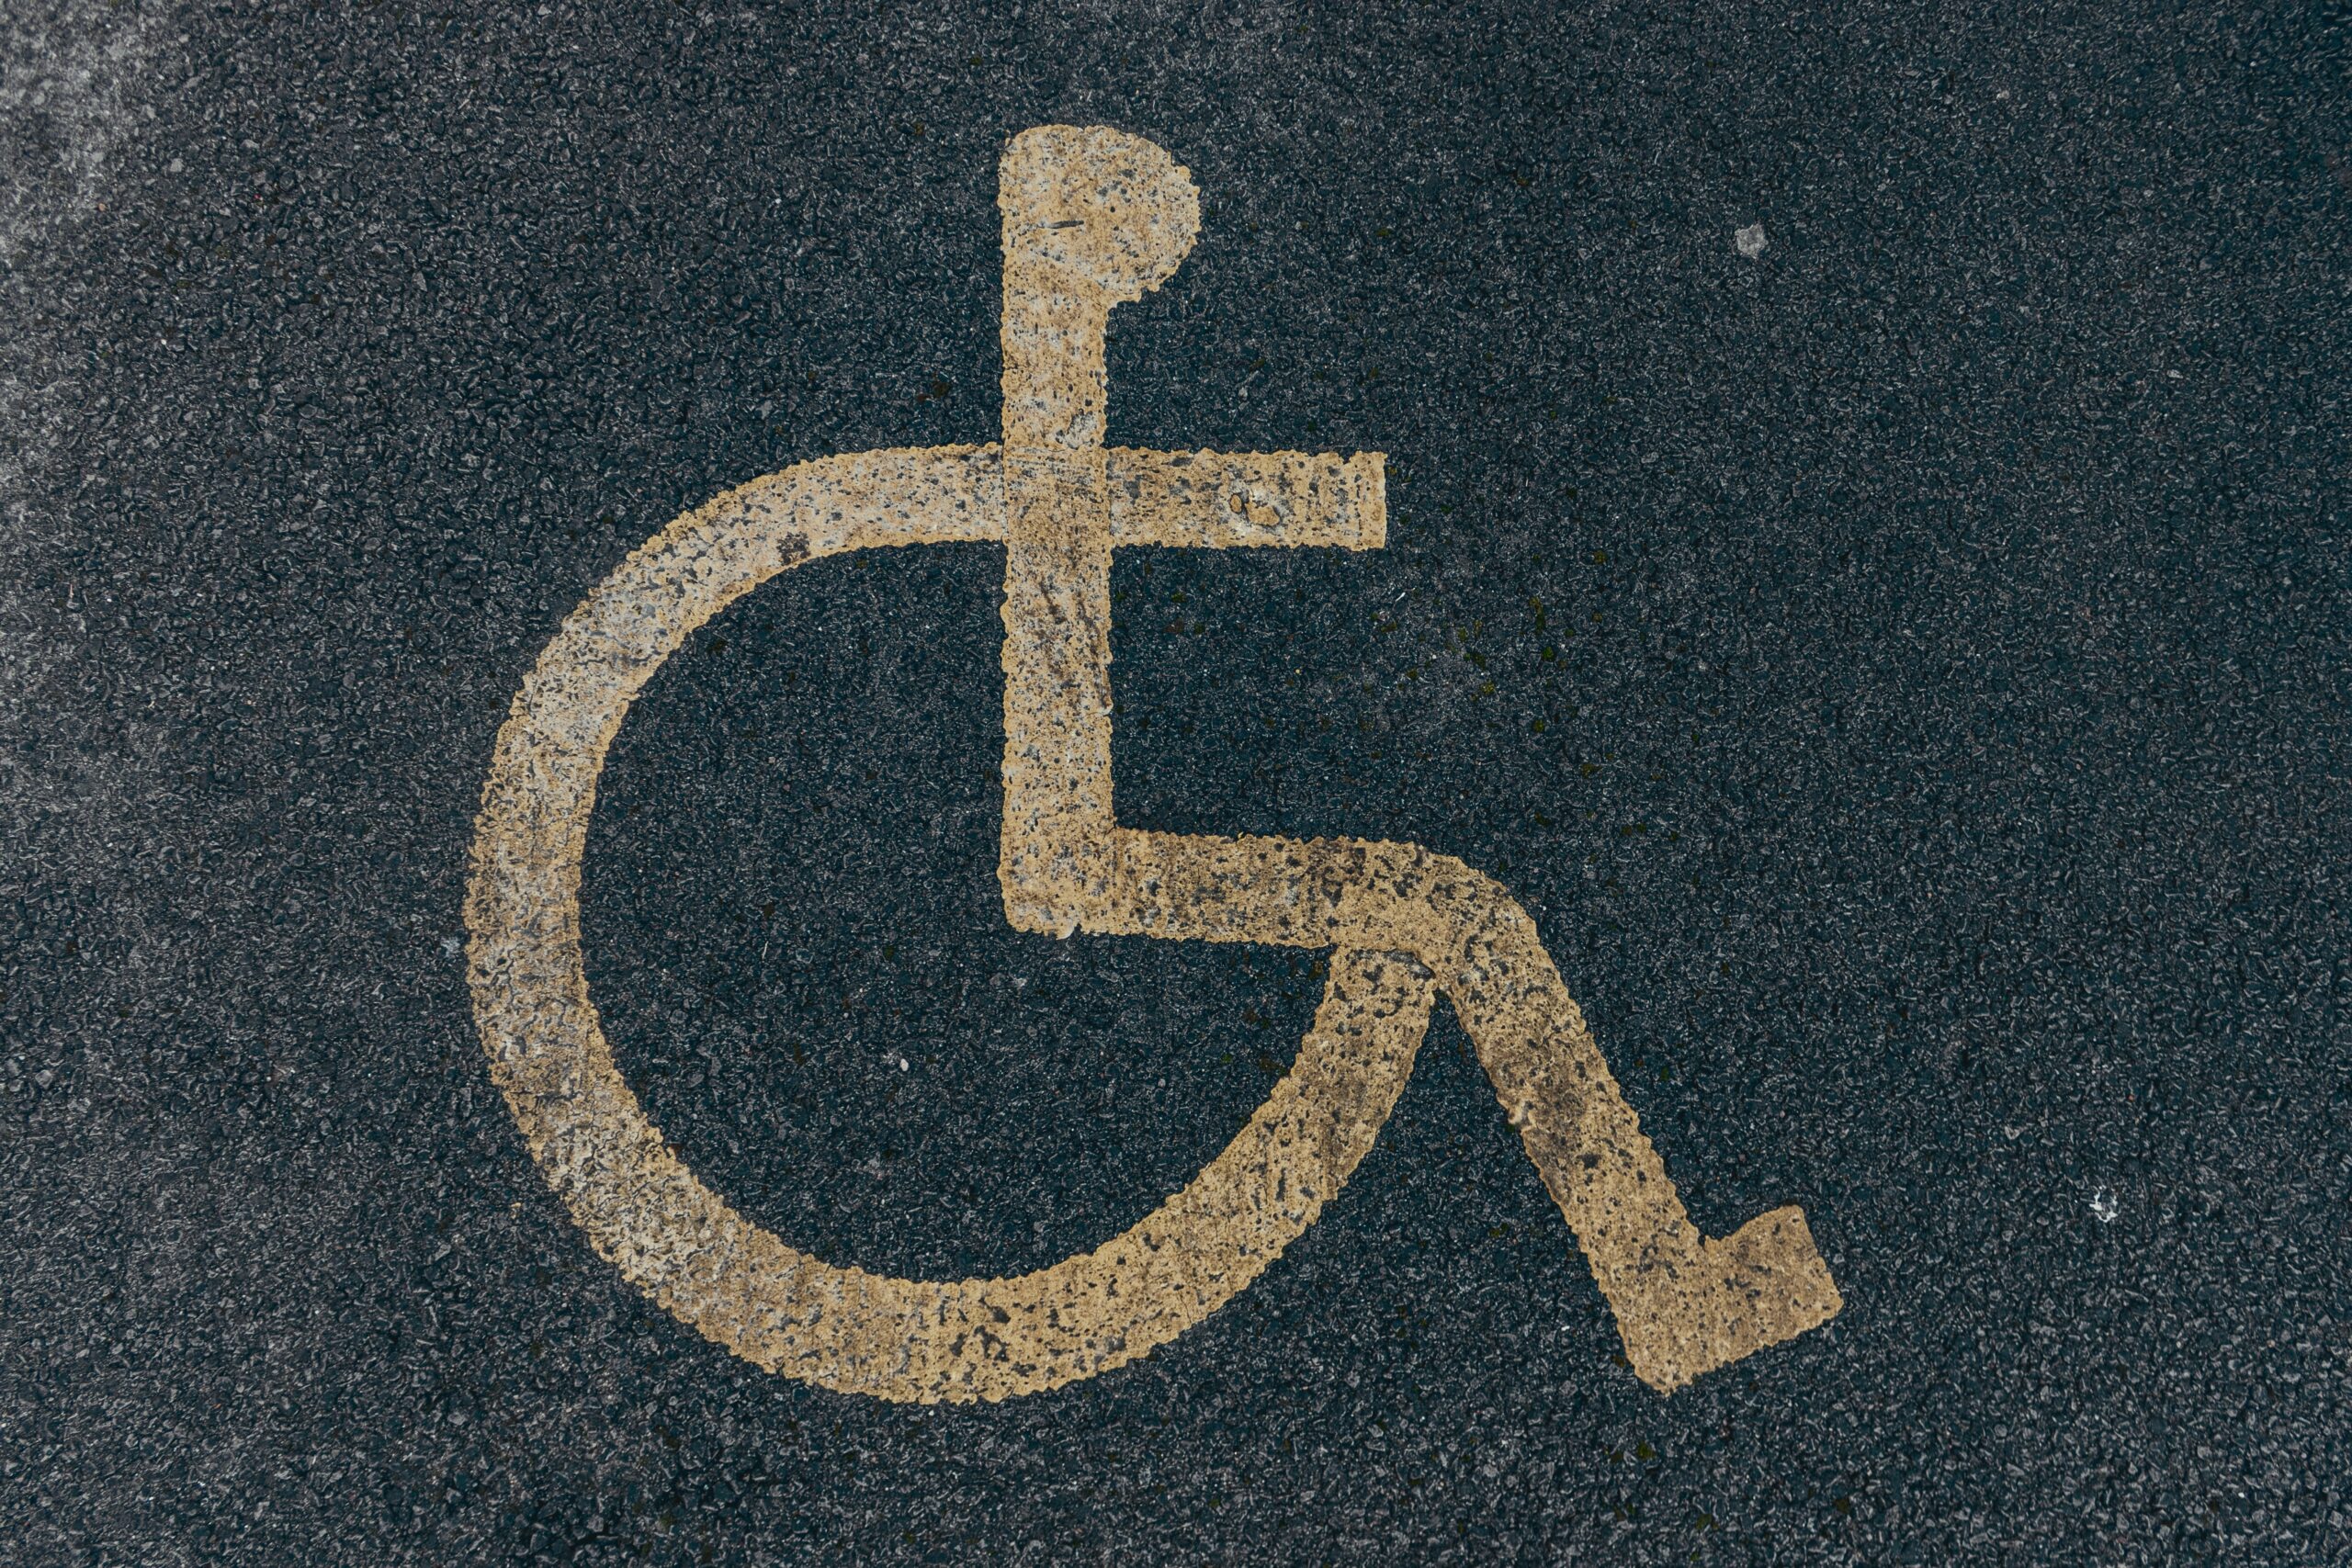 Image of a wheelchair icon on painted in white on black pavement.